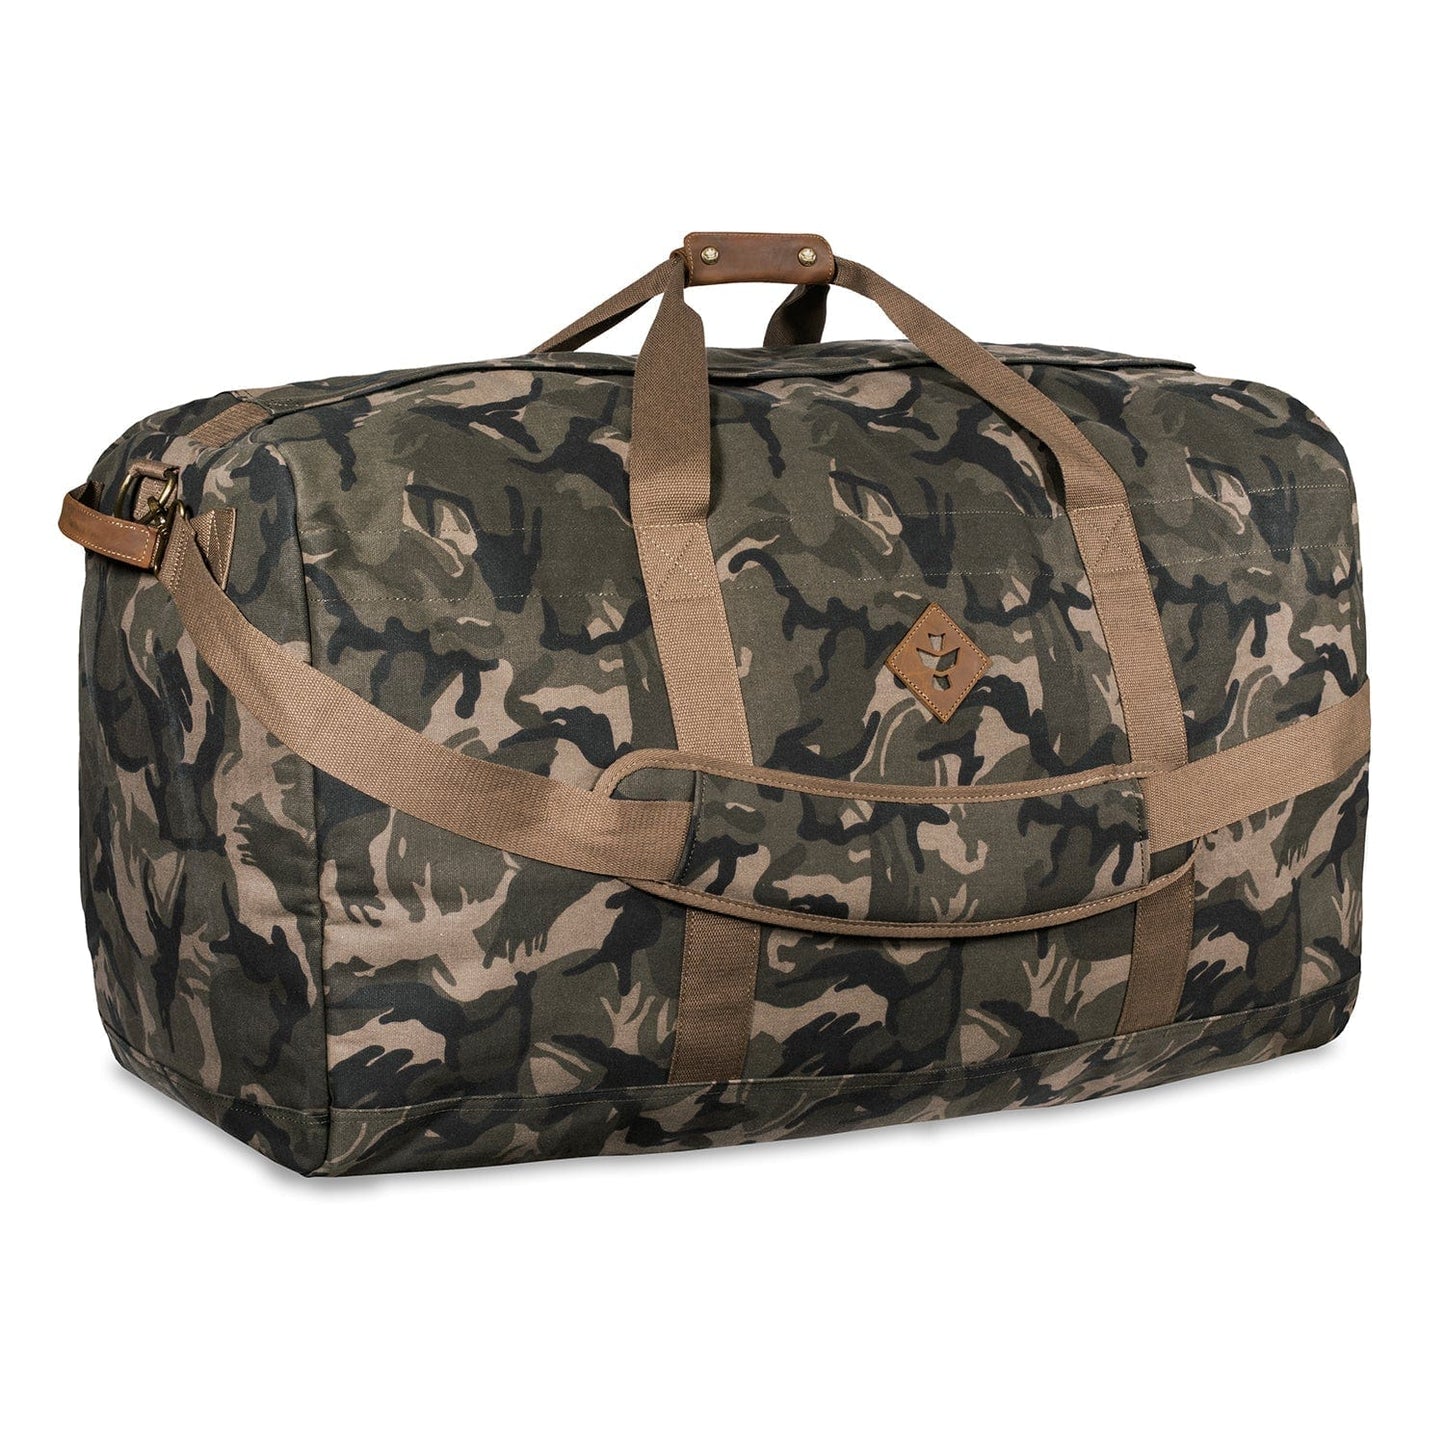 revelrysupply Camo The Northerner - Smell Proof XL Duffle